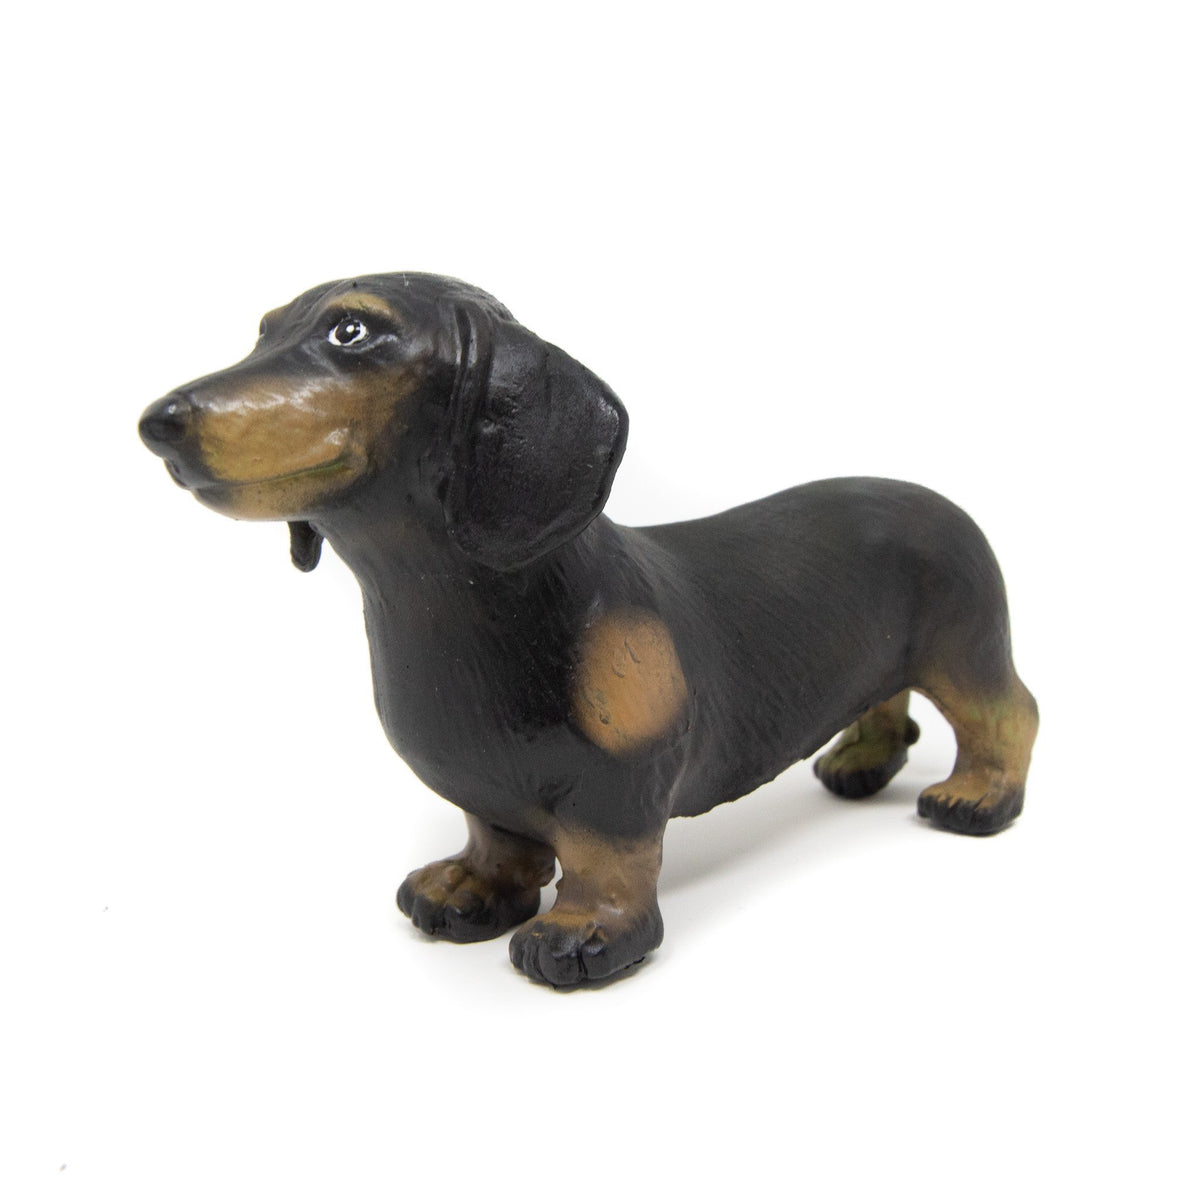 Natural Rubber Toy Dachshund - Rubber Dachshund | Natural Rubber Toys